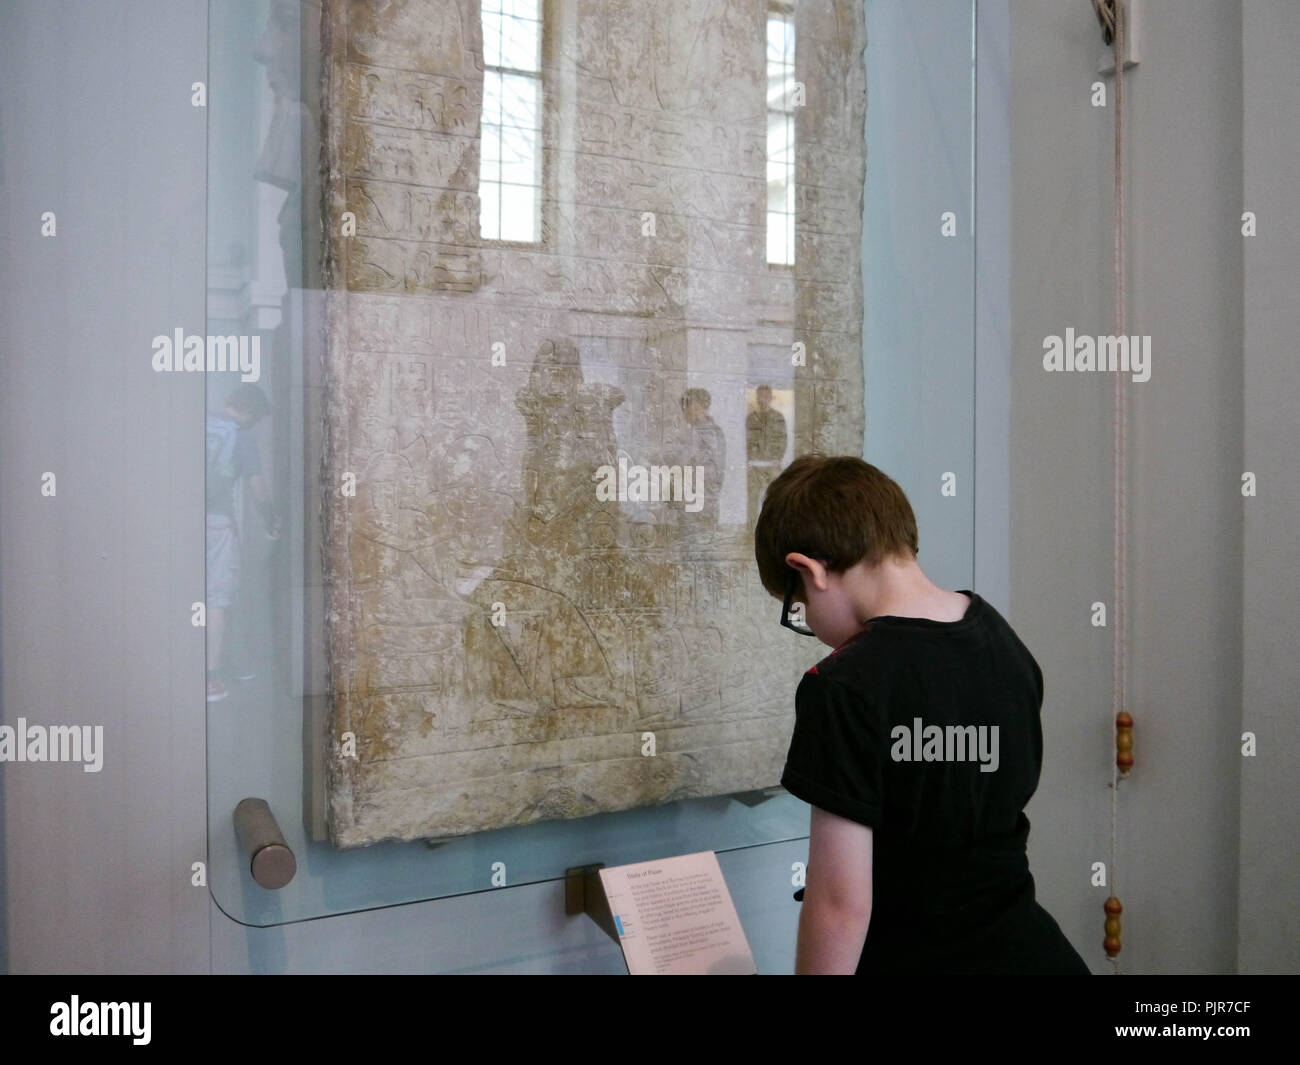 A young boy reads the information card on an exhibit at the British Museum, London, England Stock Photo